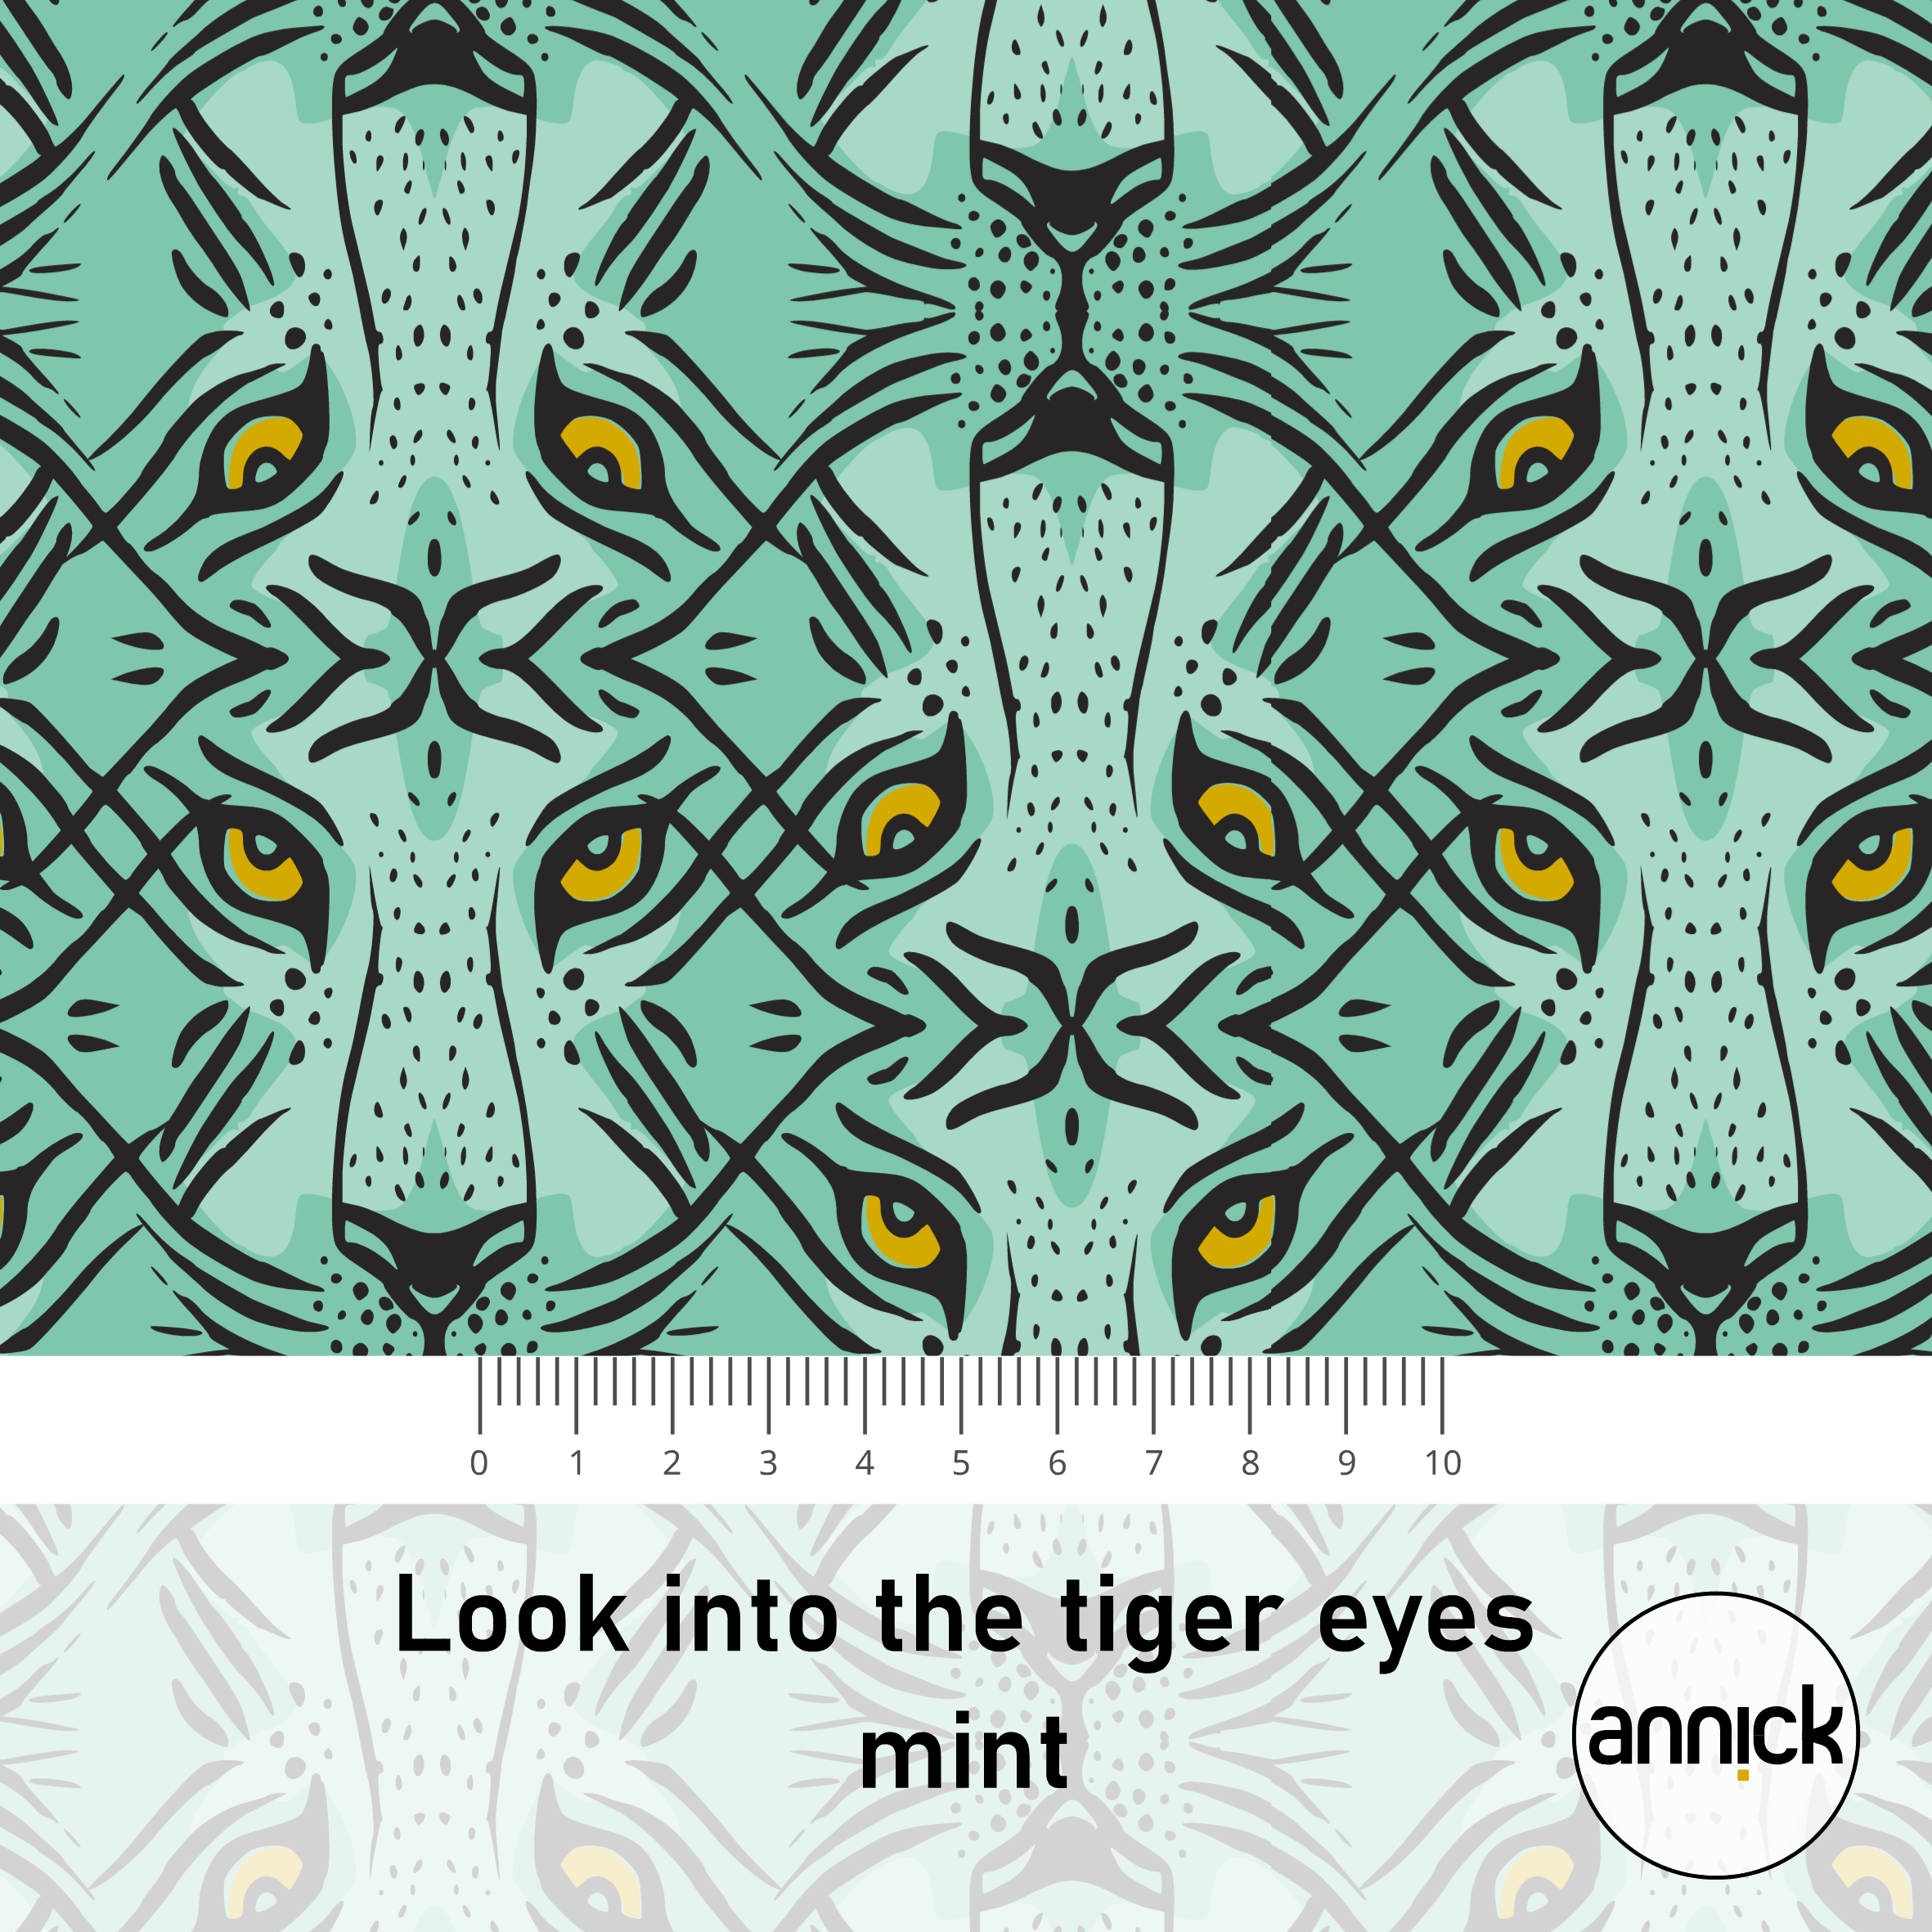 Look into the tiger eyes mint